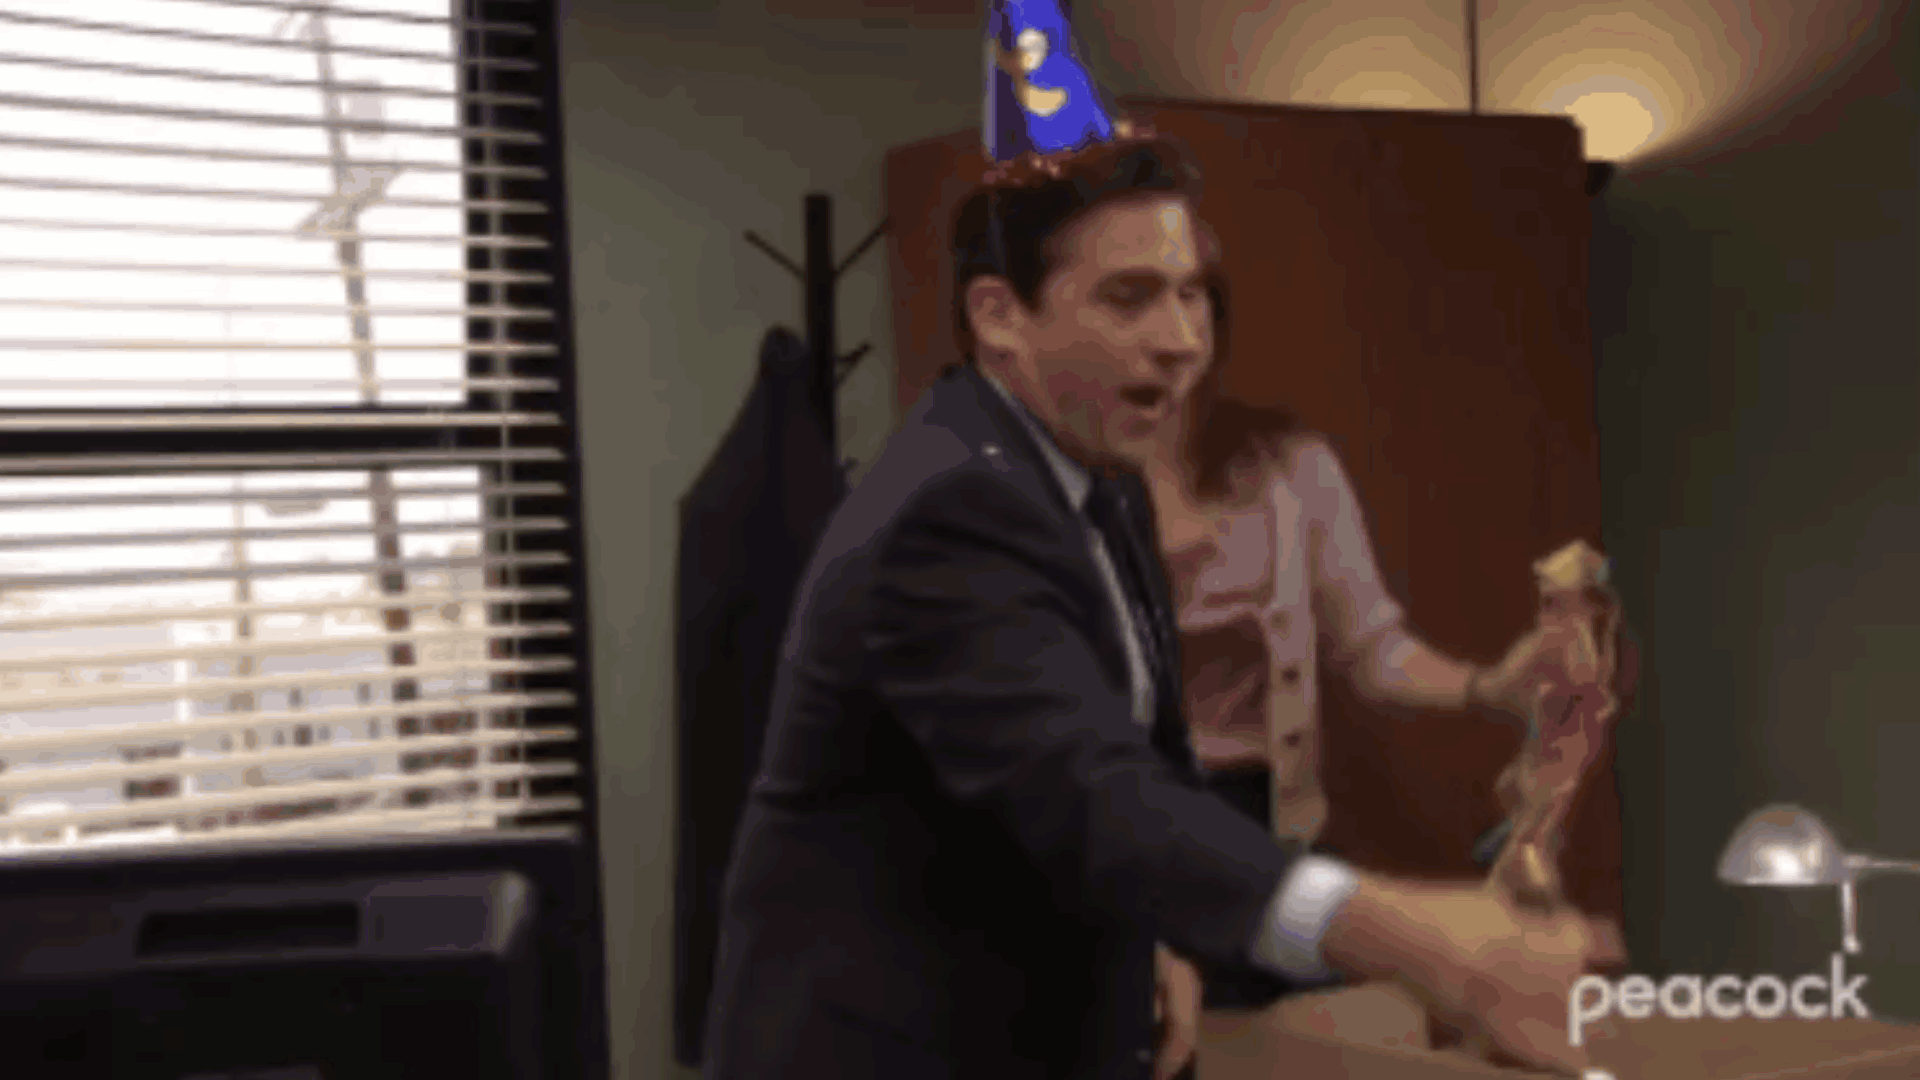 How to use GIFs in Slack example 4 - Michael Scott